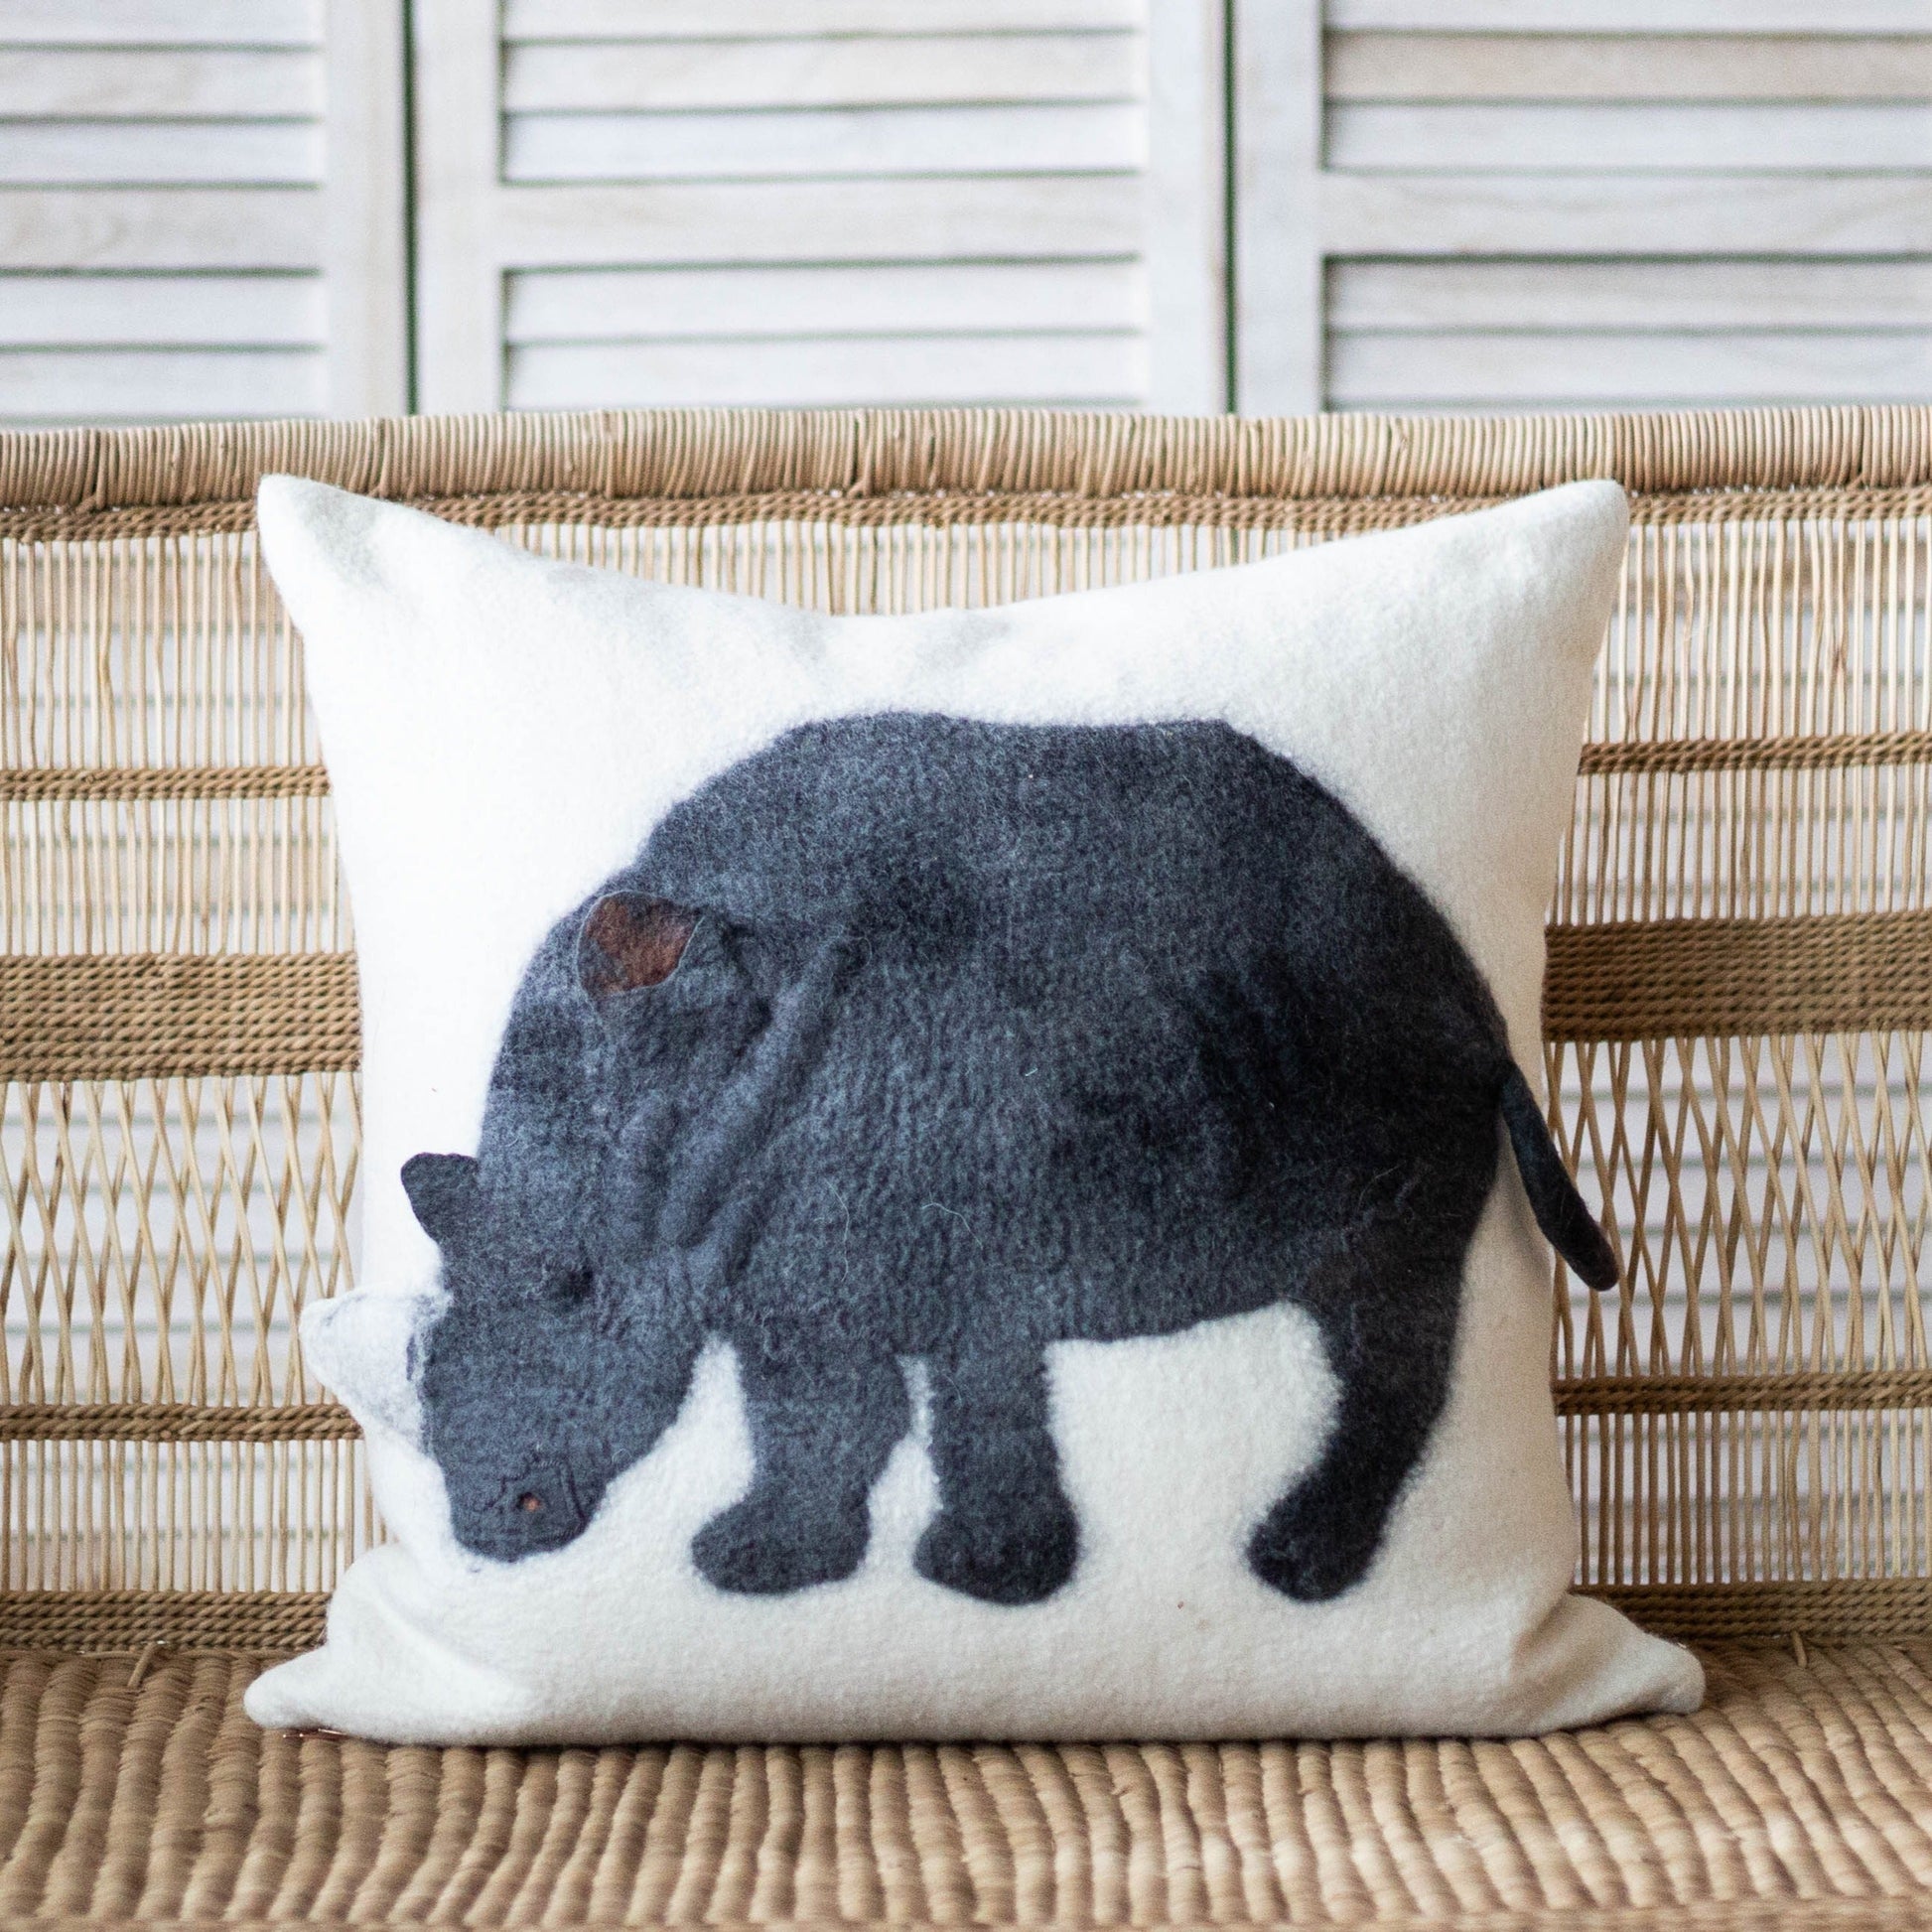 Rhino Hand Felted Decorative Pillow - Wildlife Home Decor Large Square